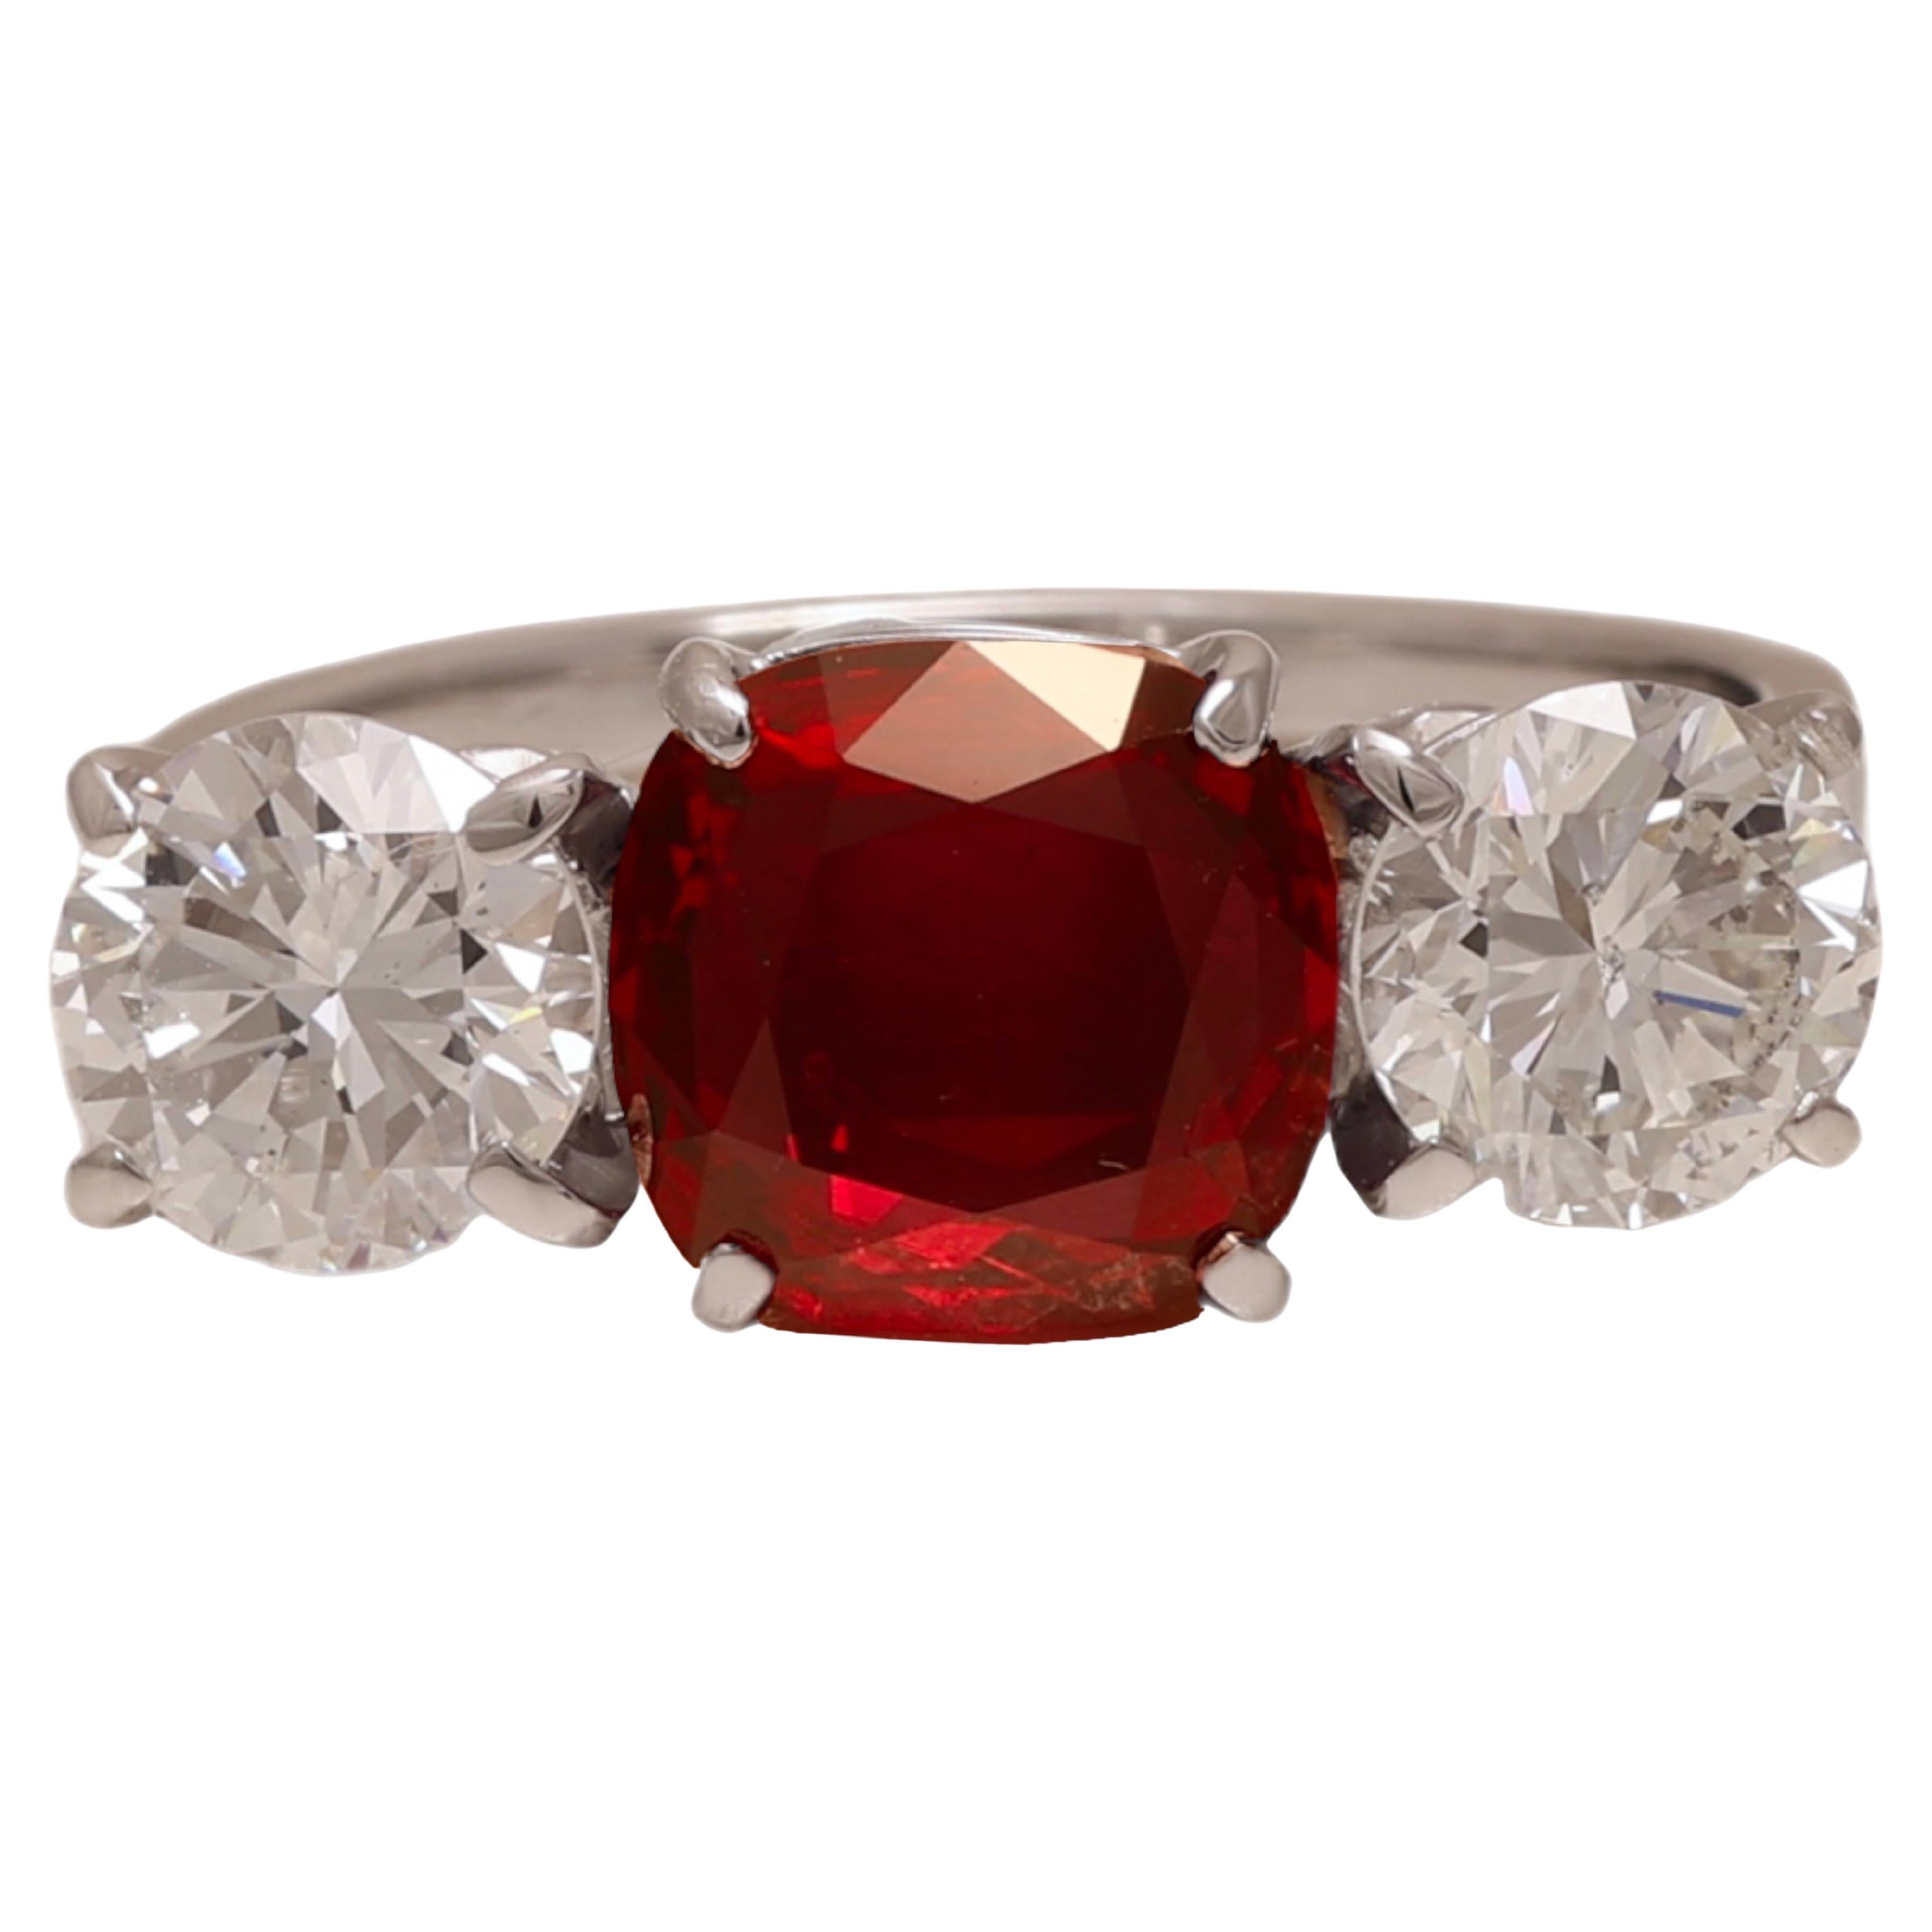 18 kt. White Gold Trilogy Ring  2.2 ct. Vivid Red Siam Ruby & 1.73 ct. Diamonds